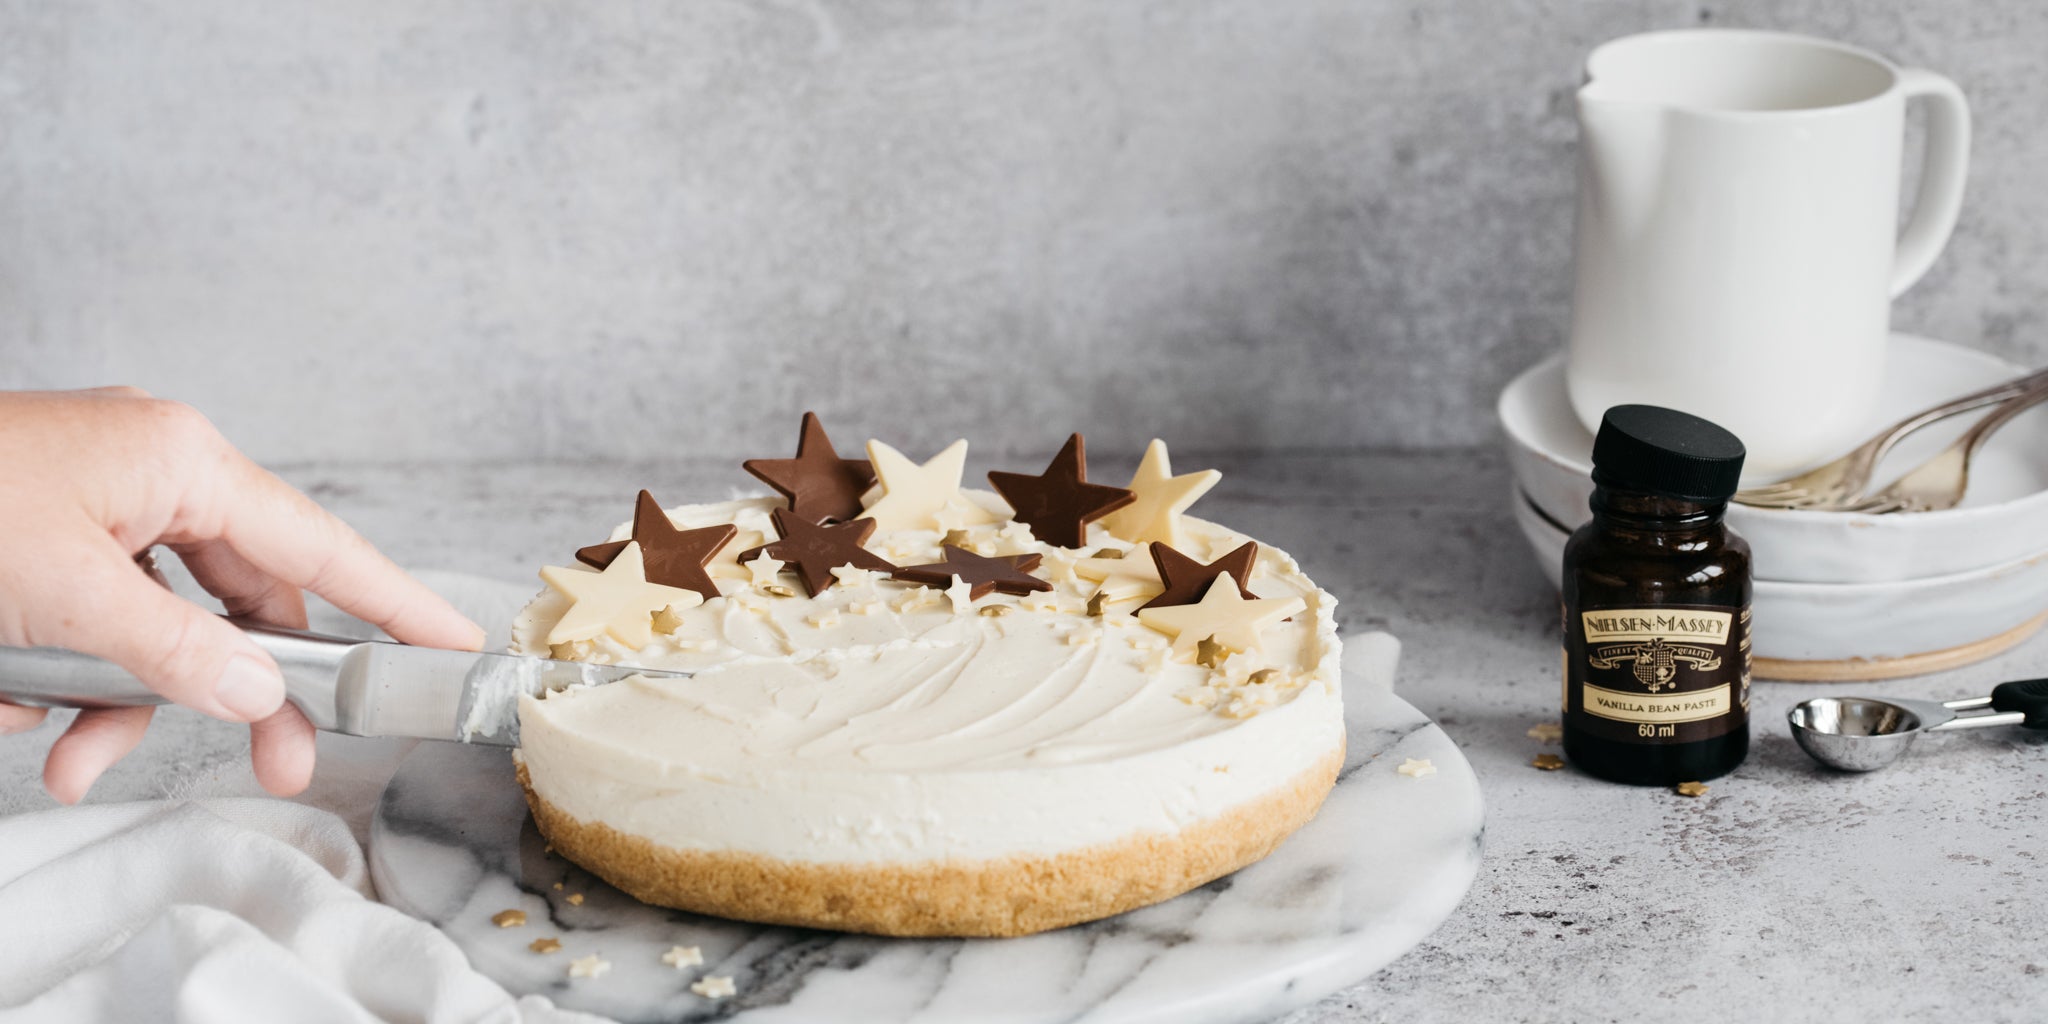 Hand with knife cutting into a vanilla cheesecake with chocolate star decorations. Bottle of vanilla bean paste in shot next to stack of crockery